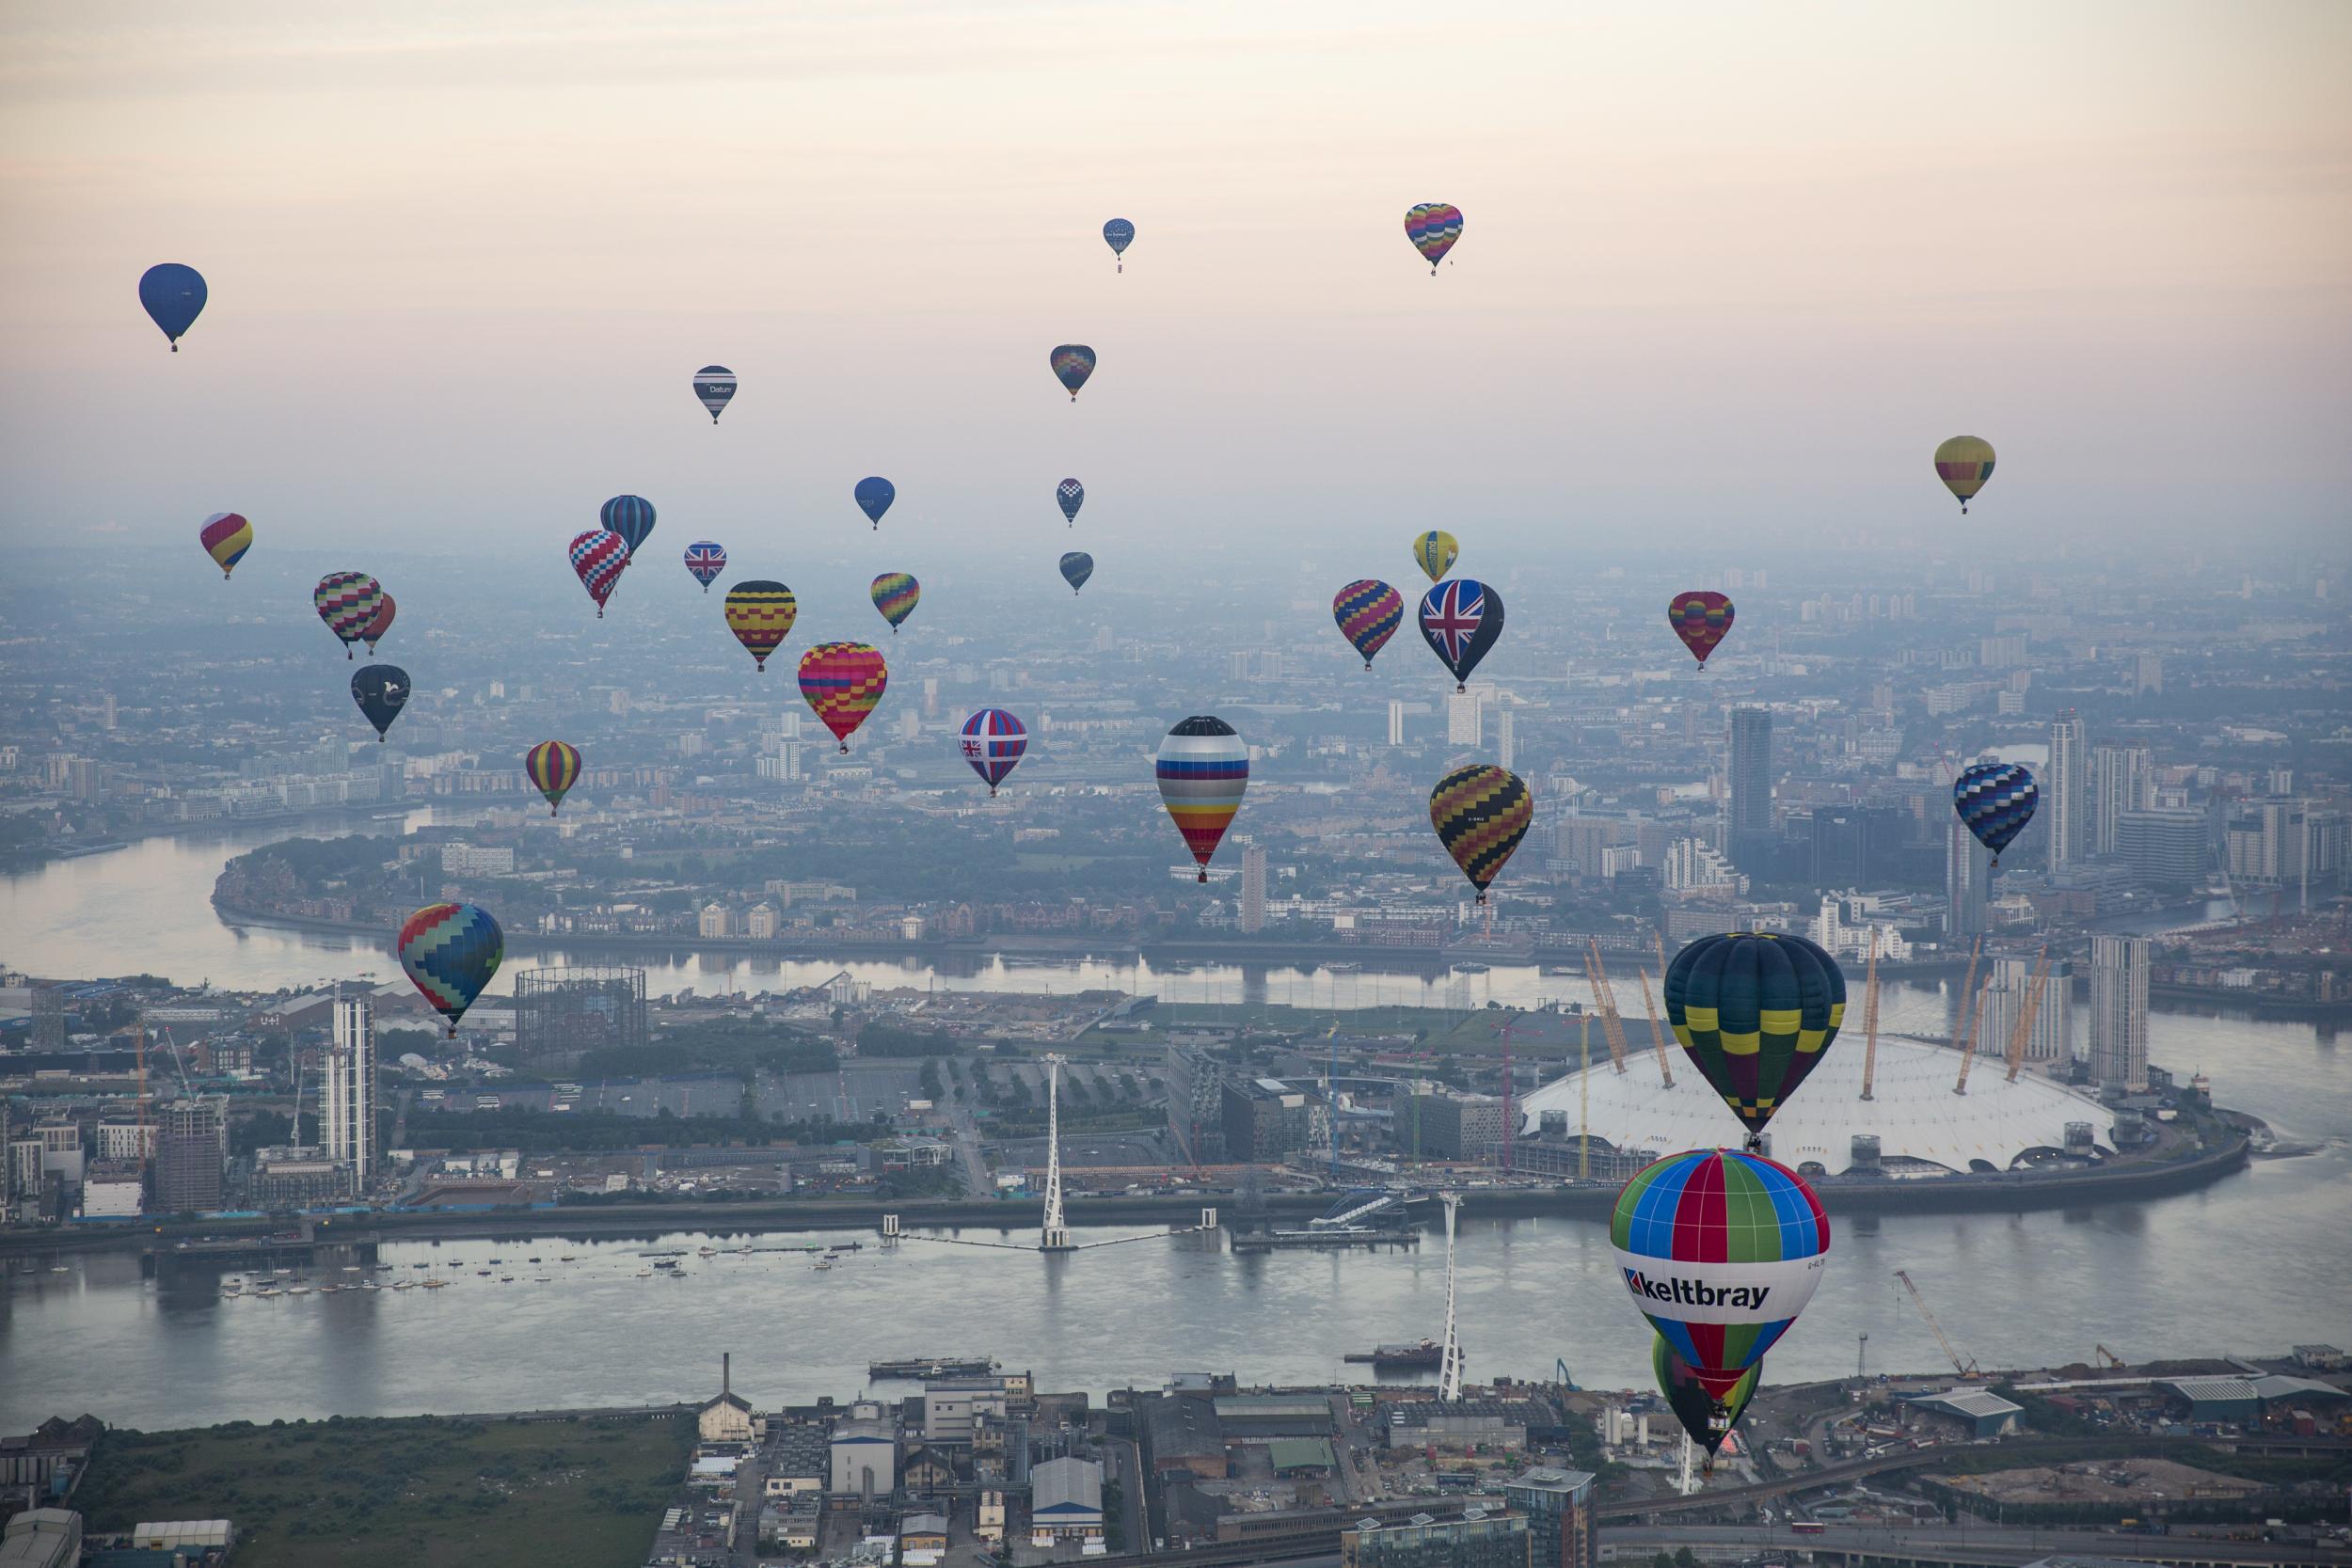 Hot air balloons over the London Skyline on 19 June 2016